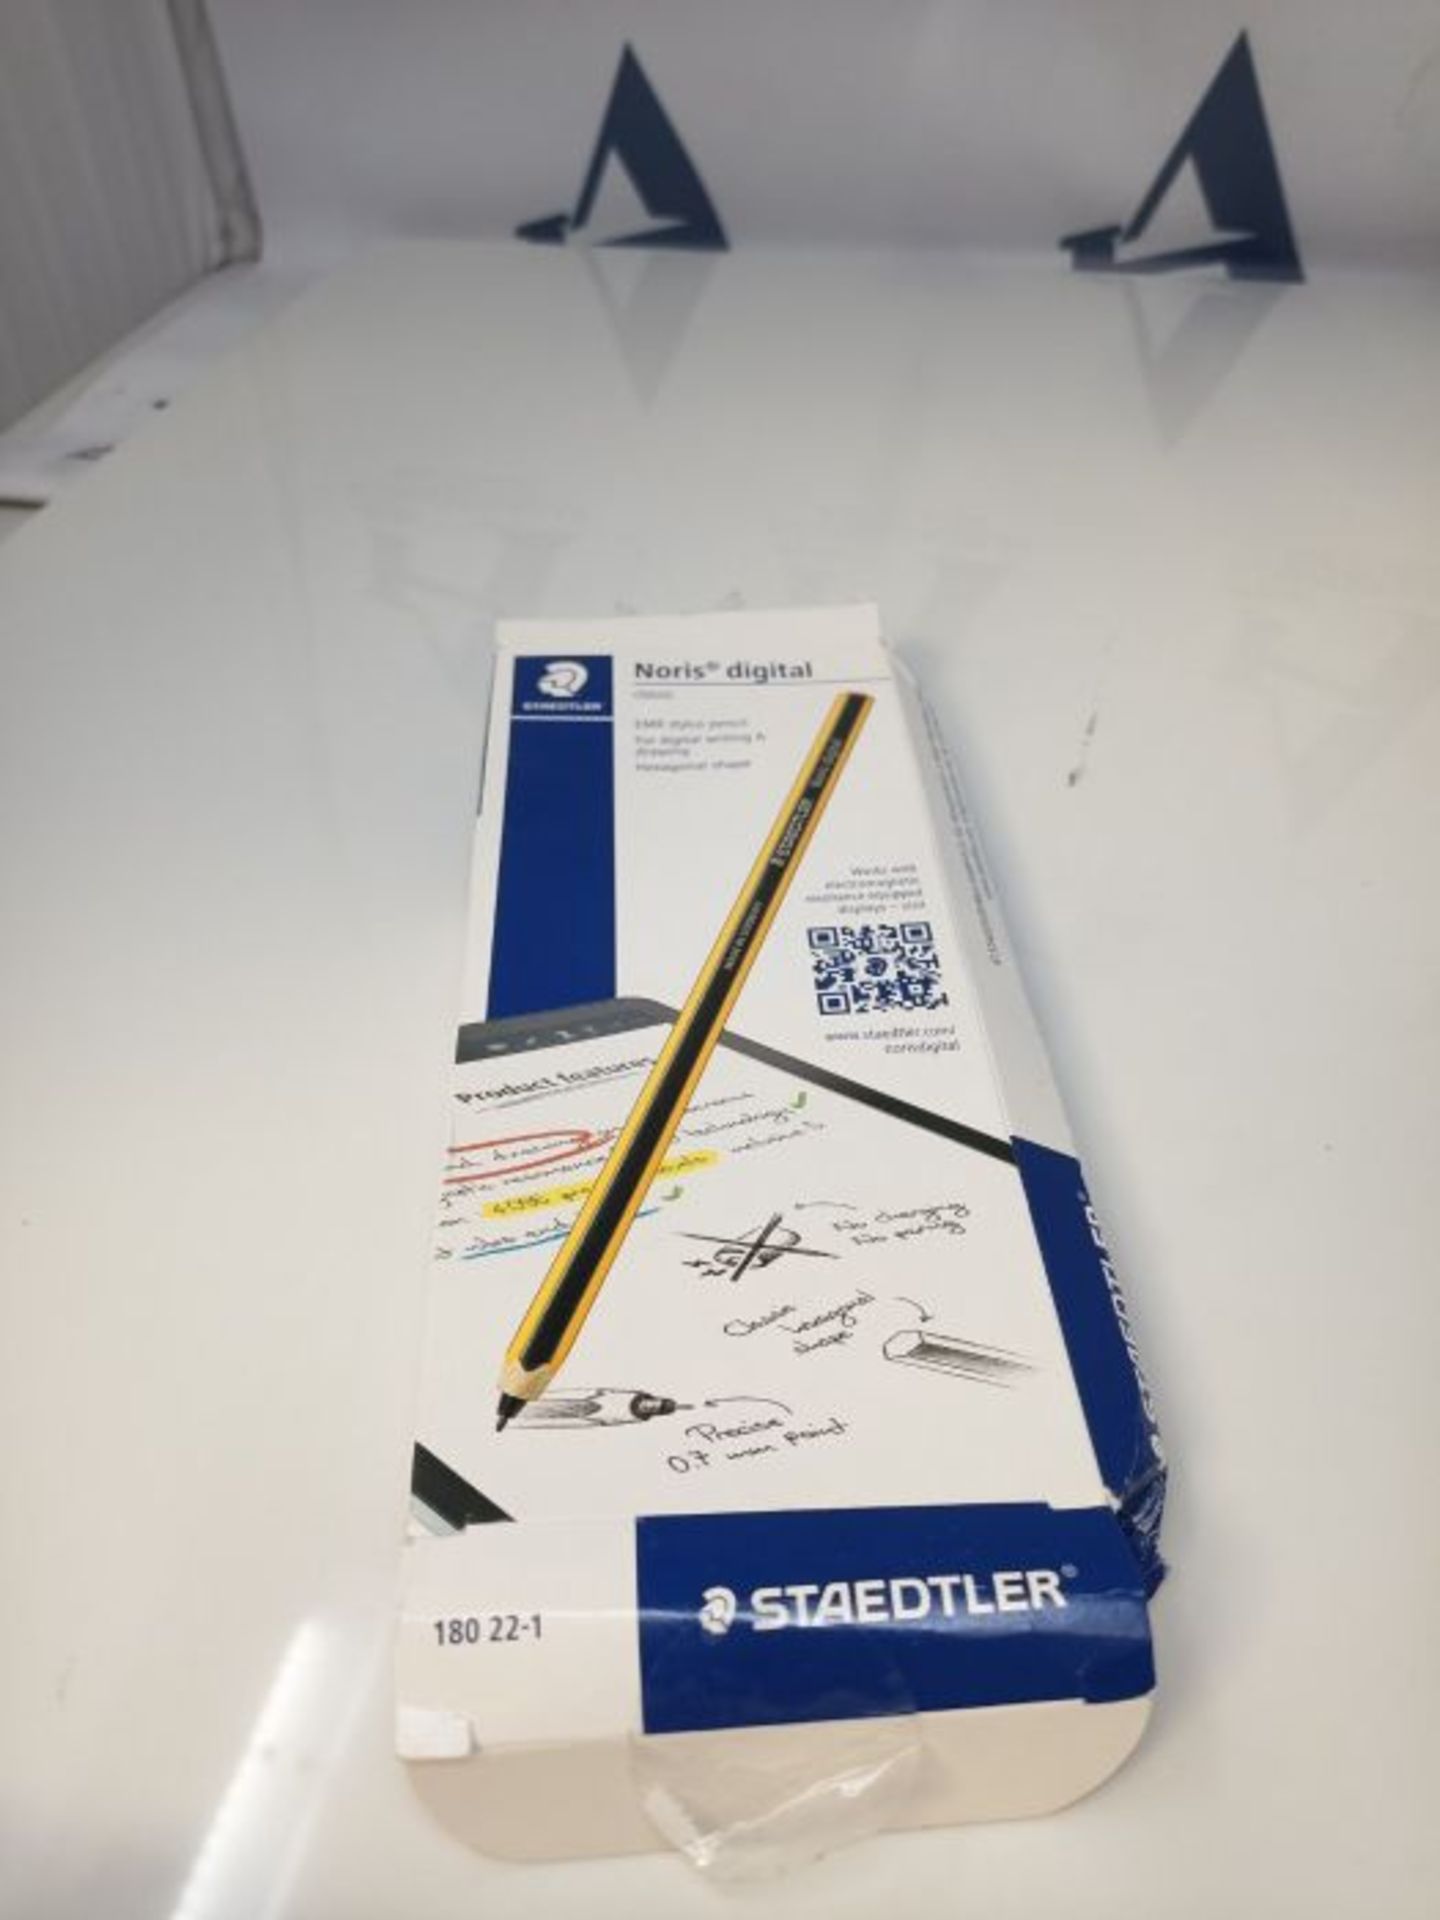 STAEDTLER Noris digital classic 180 22 EMR Stylus for Digital Writing and Drawing on E - Image 2 of 3